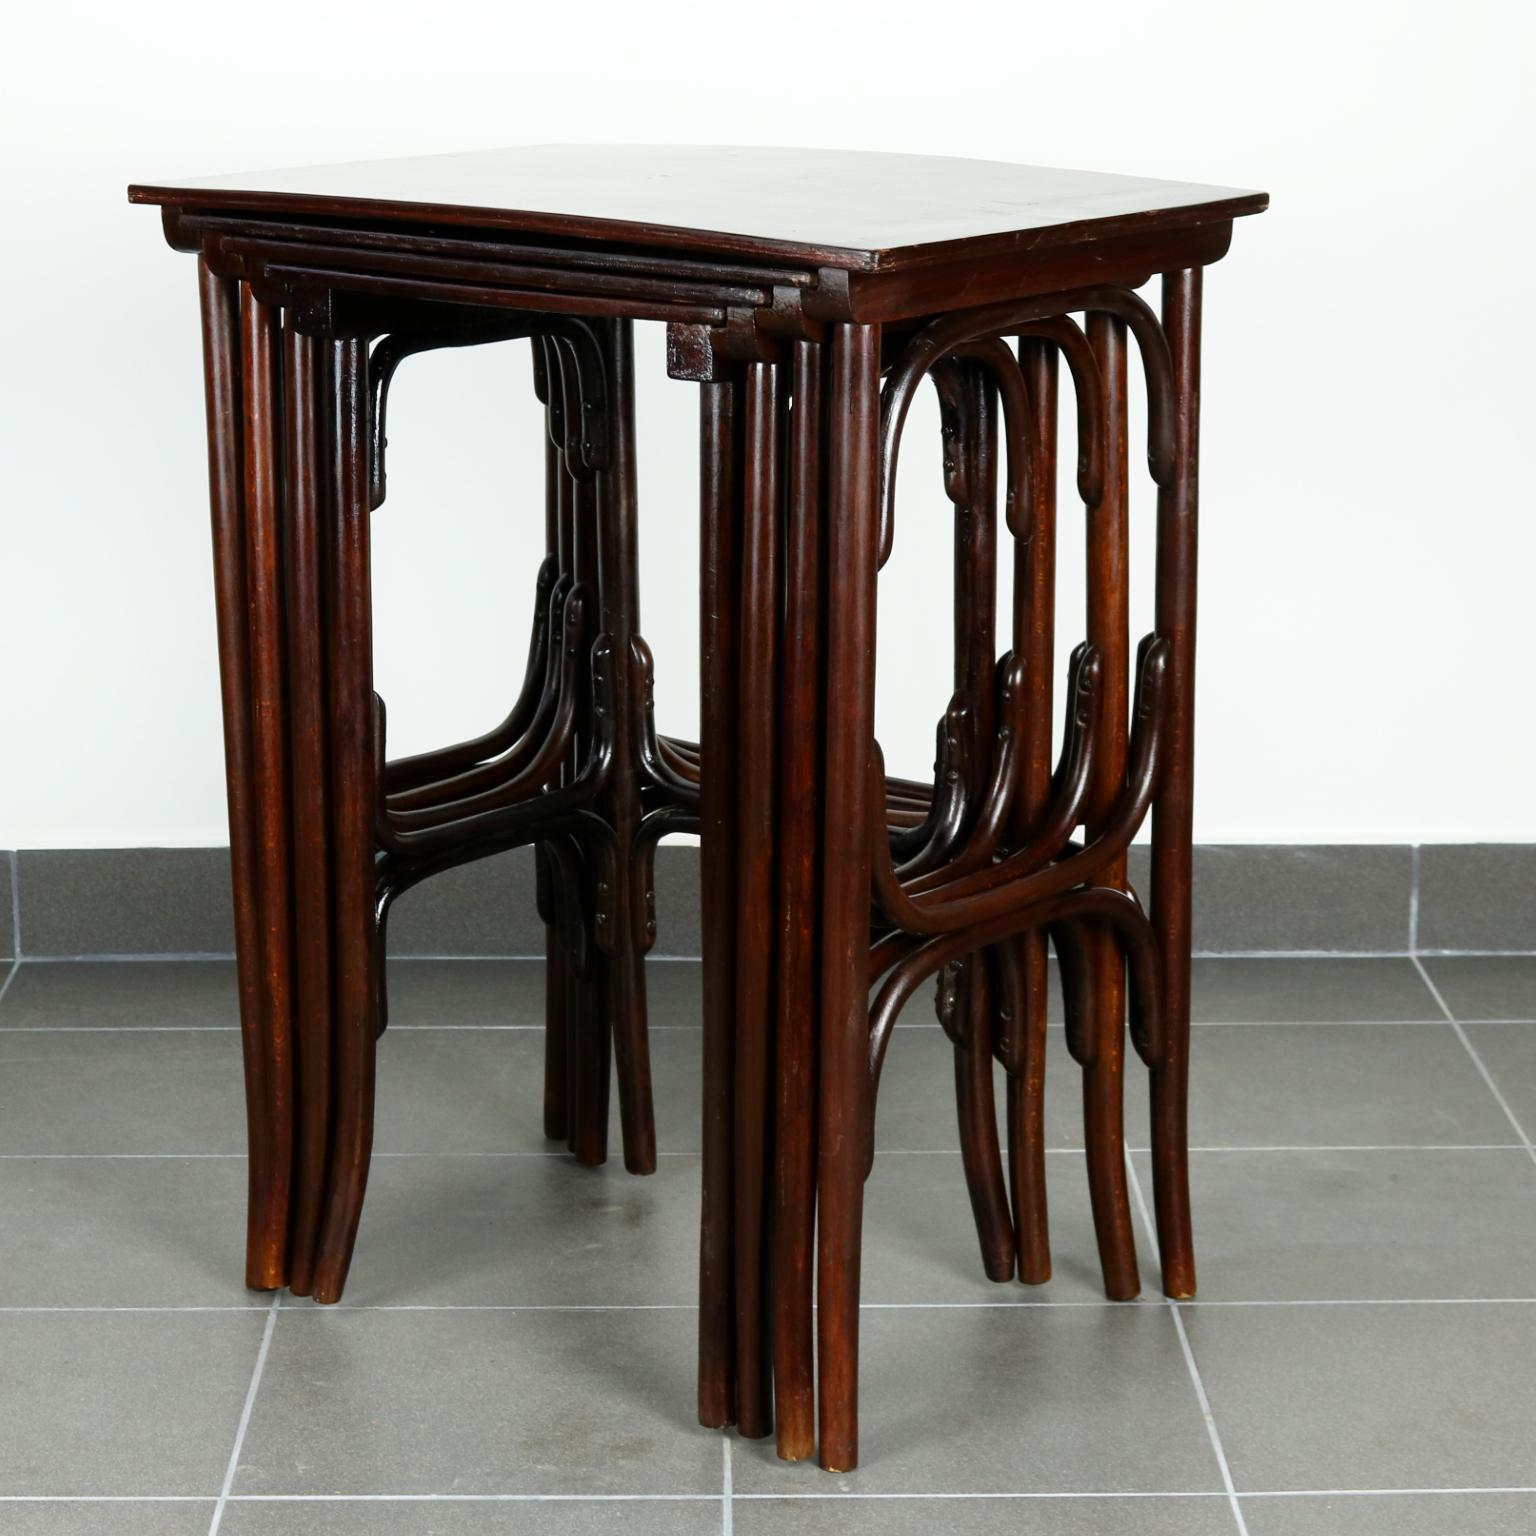 Bentwood Set of Four Pieces Nesting Tables No.10 by Thonet, circa 1900